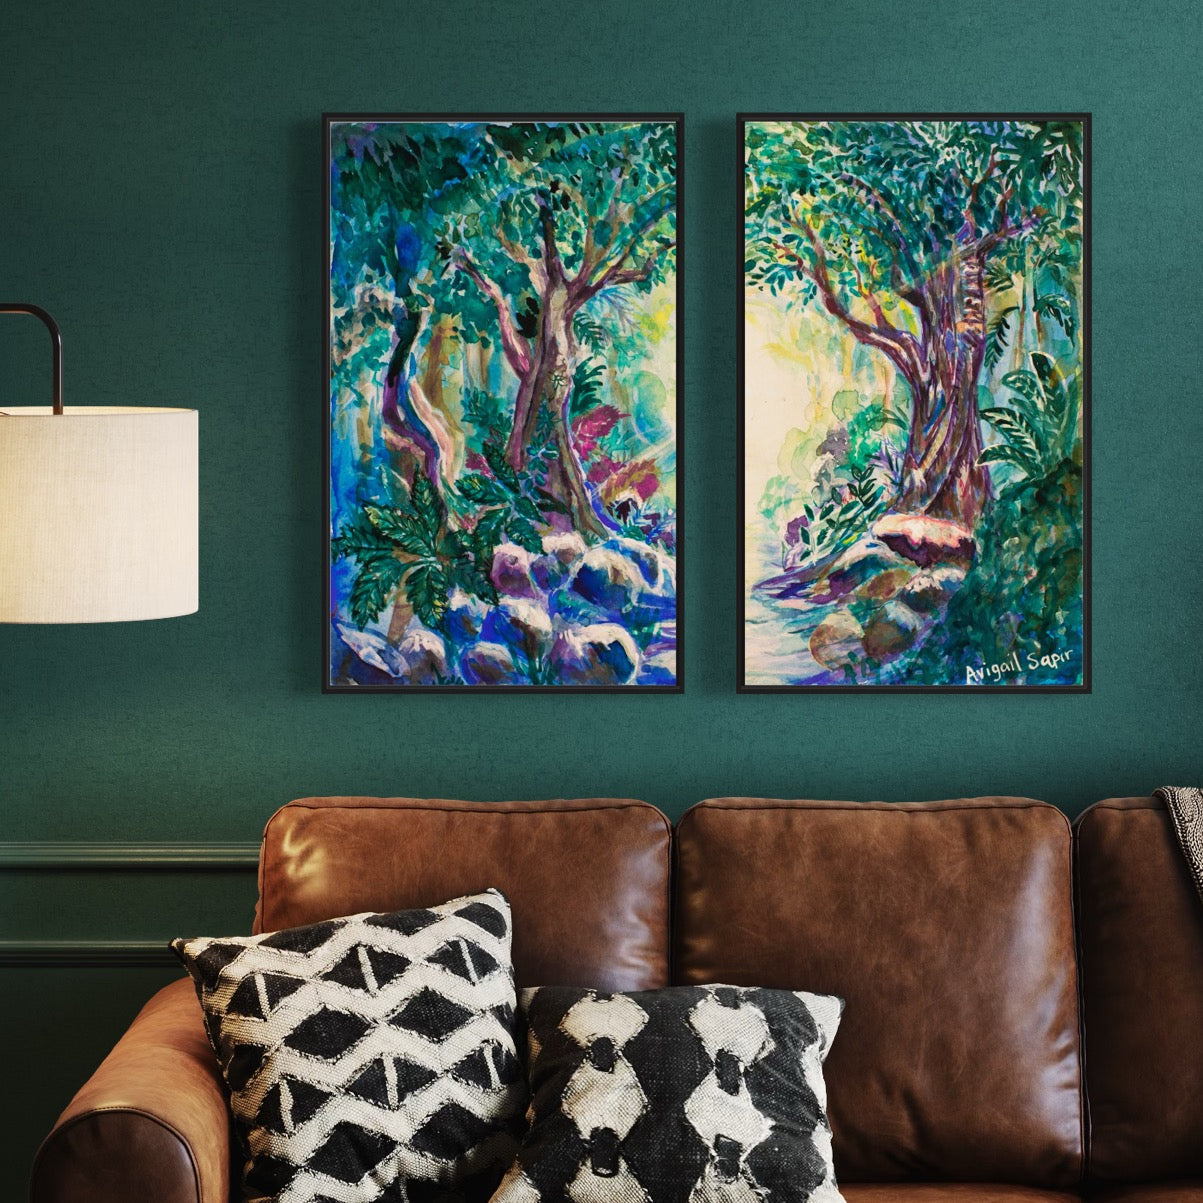 The Journey Begins Diptych Pair by Avigail Sapir - Fine Art Print on Canvas or Paper